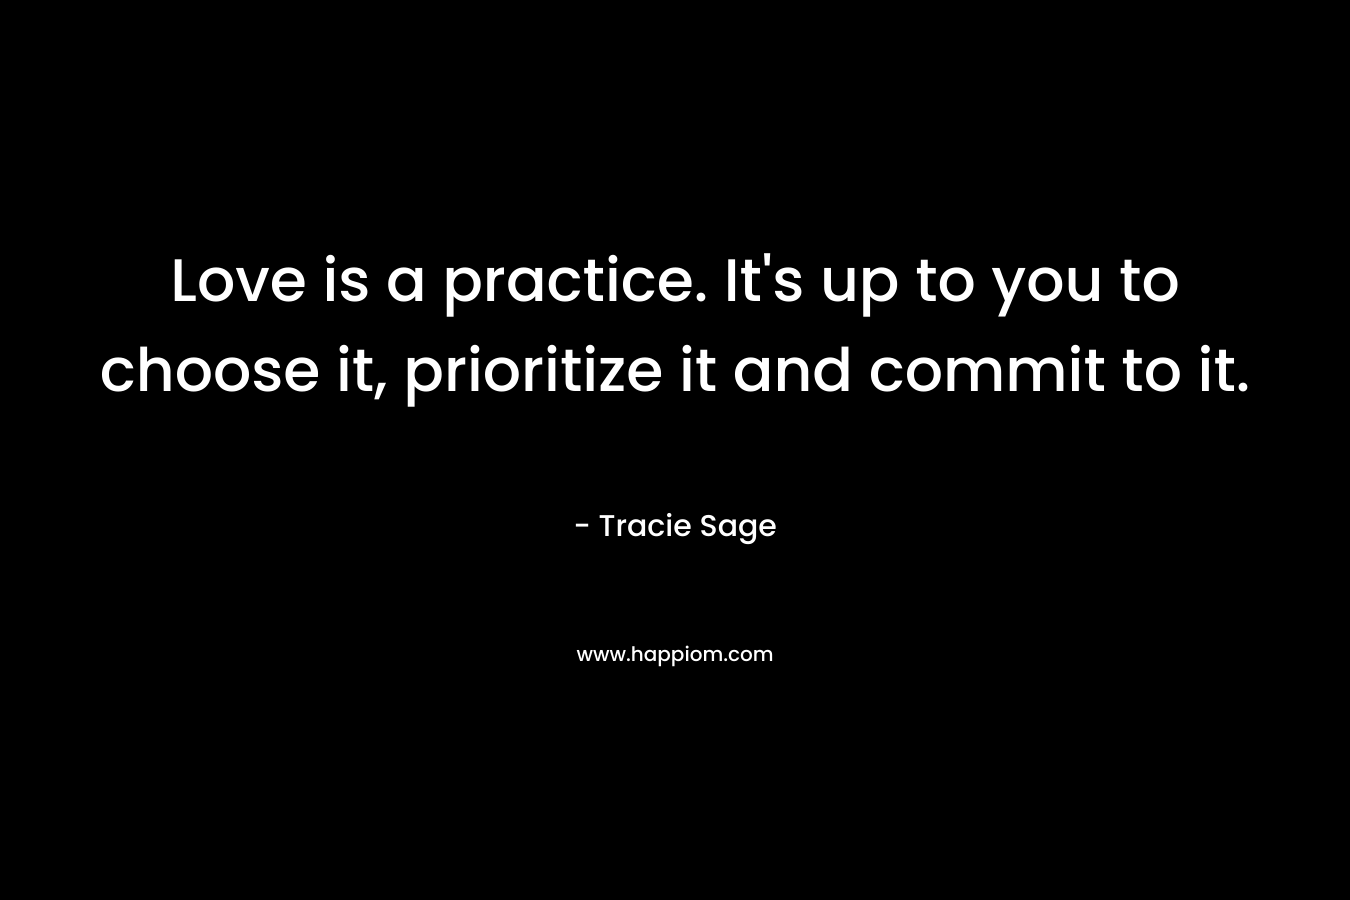 Love is a practice. It's up to you to choose it, prioritize it and commit to it.